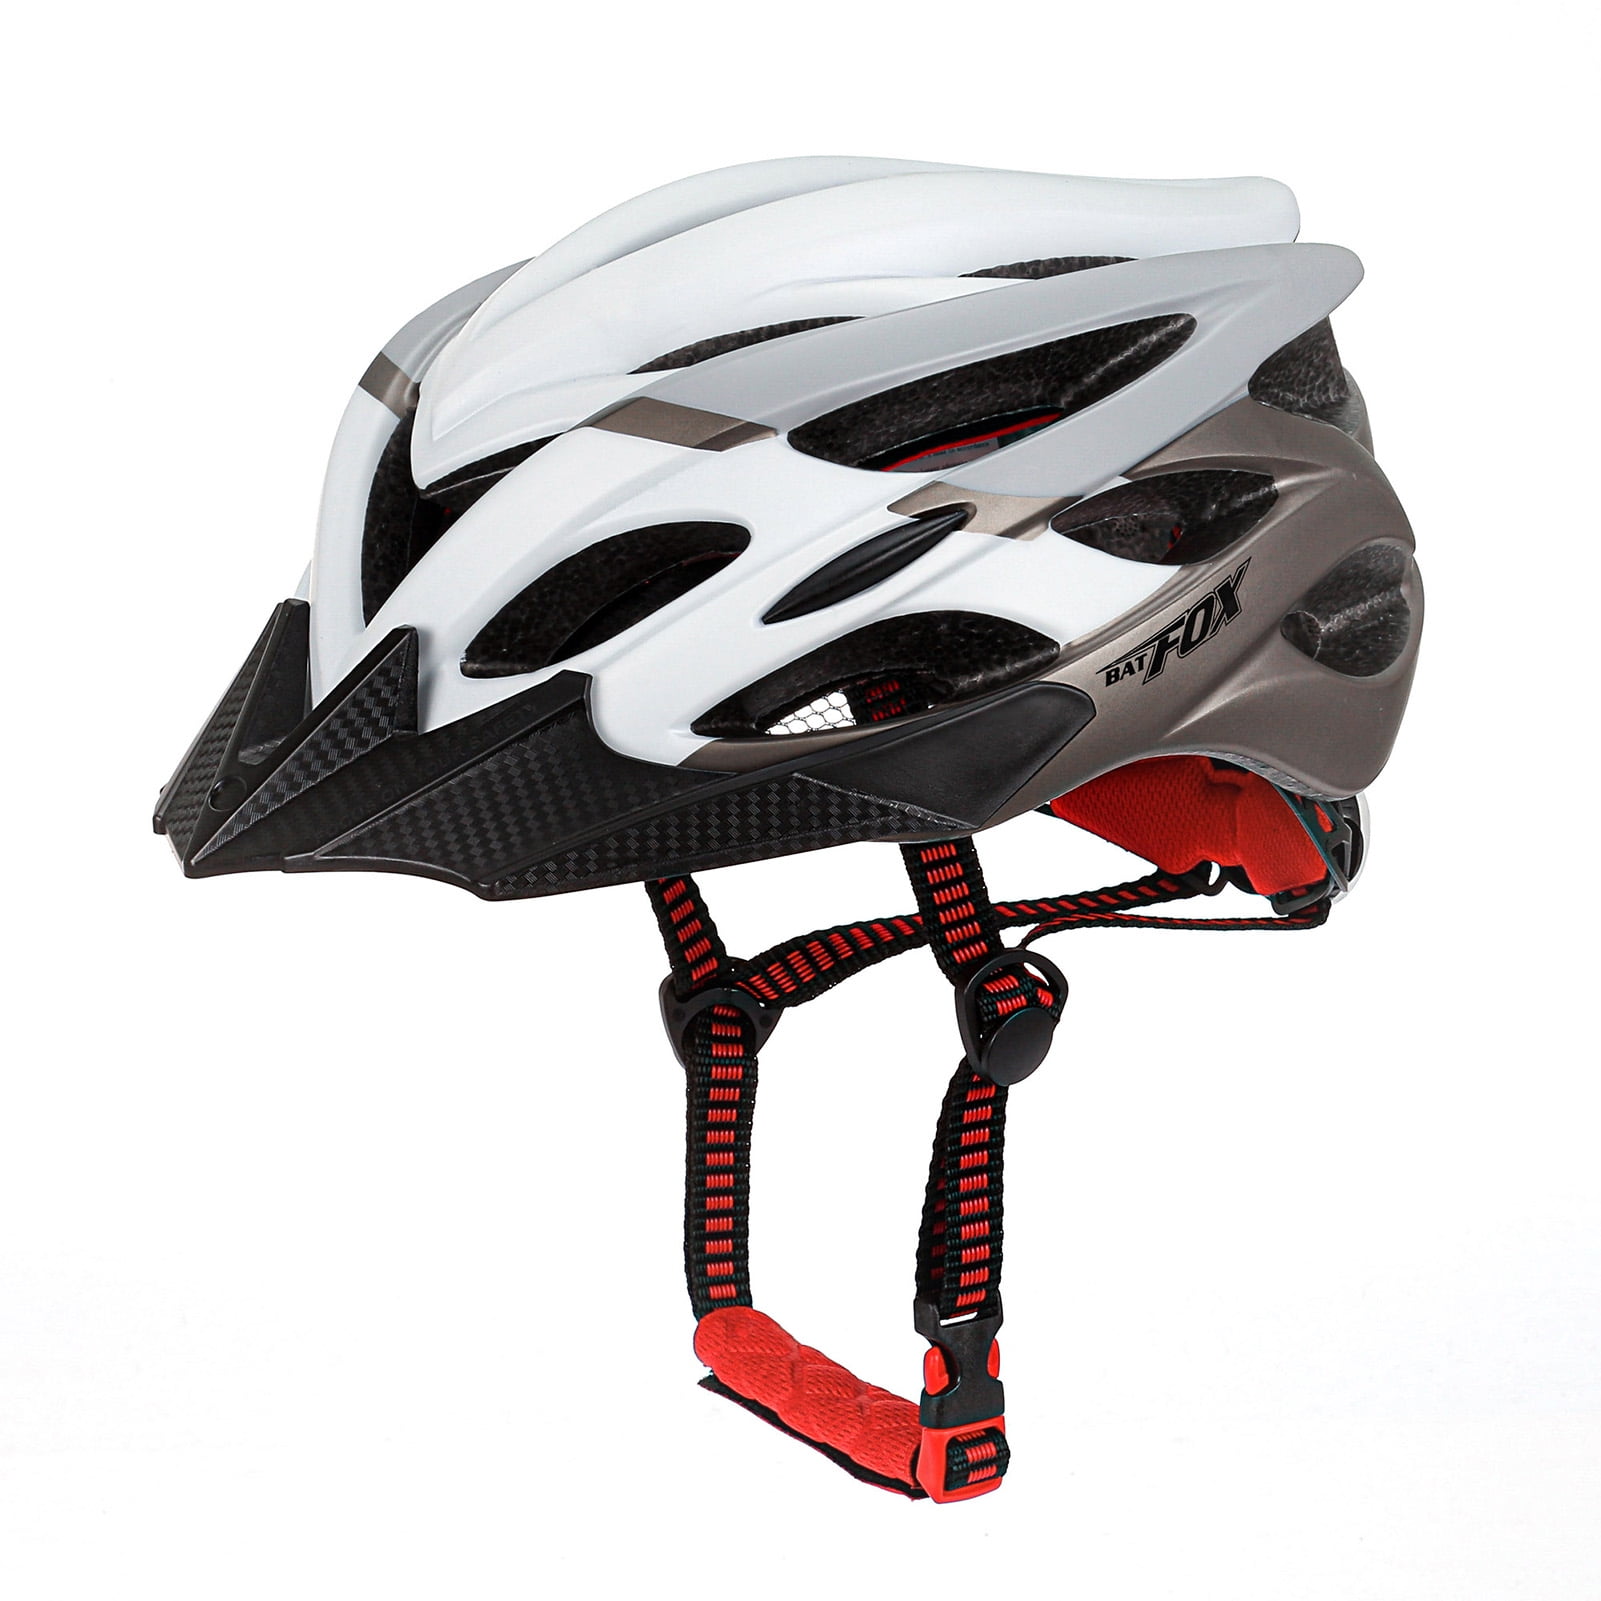 Details about   Bike Helmet Unisex Cycling Bike Sports Safety Mountain Kids Adult Vents Design 